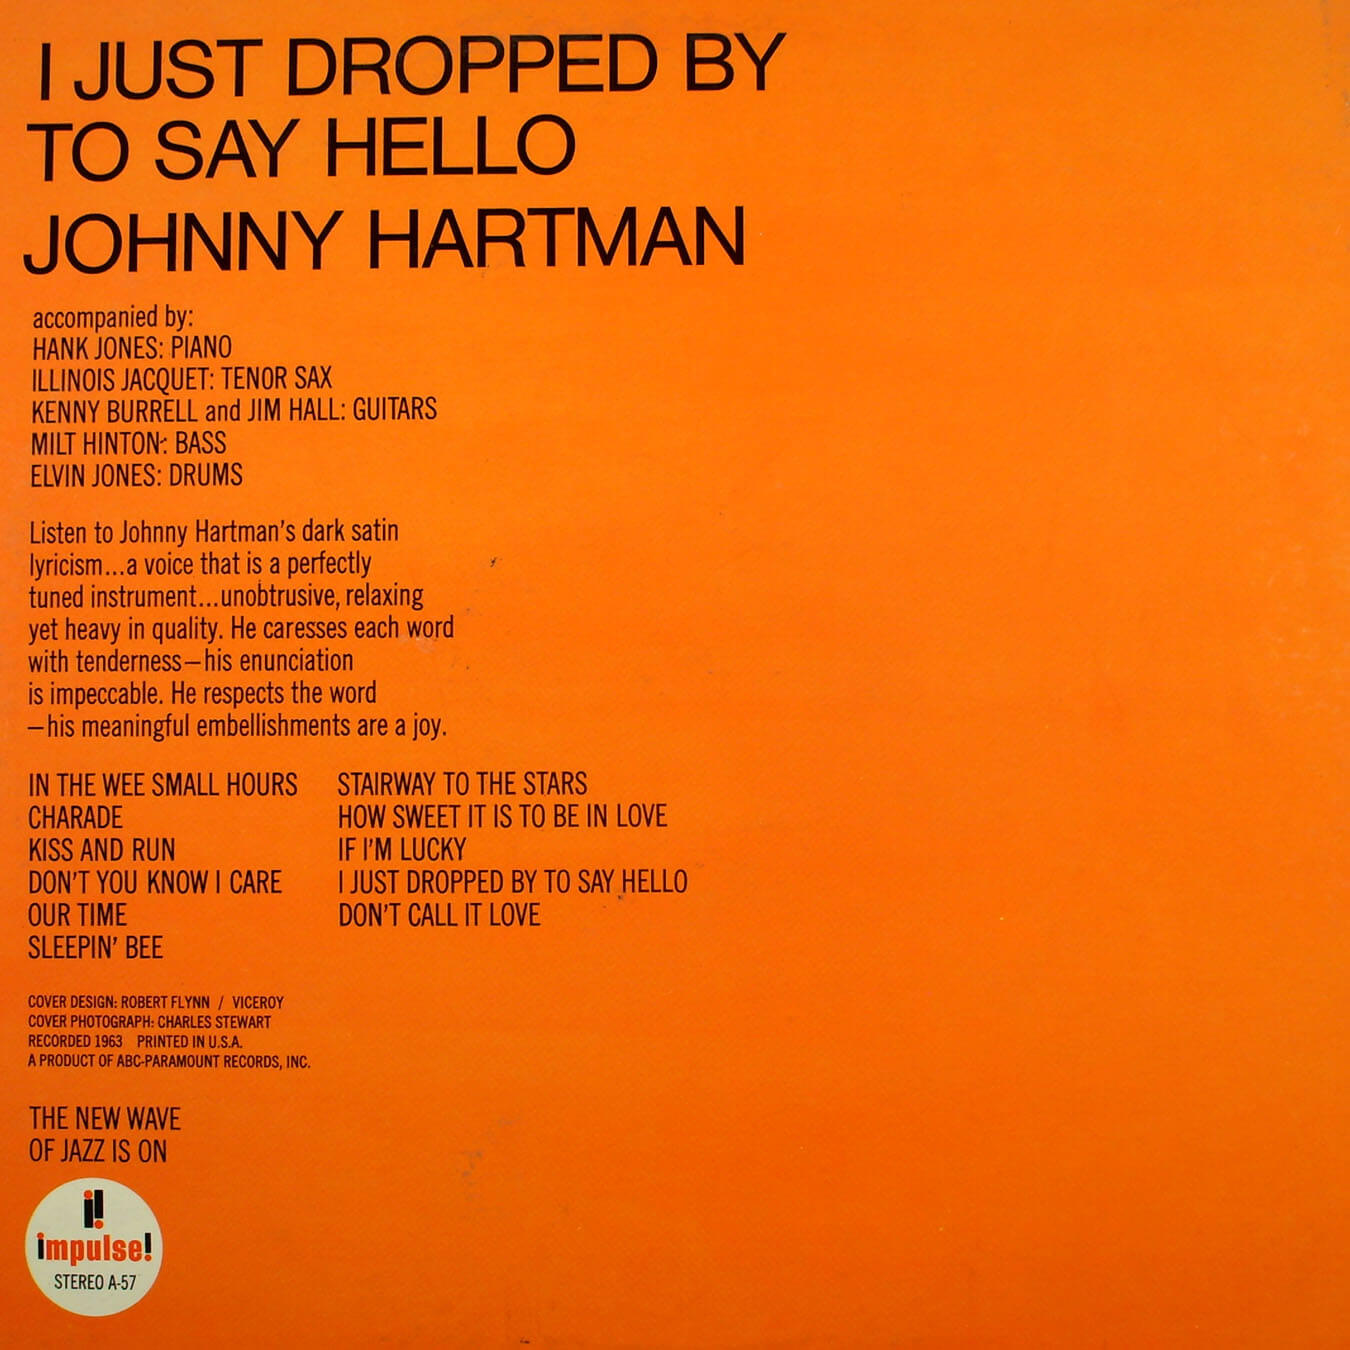 johnny-hartman-i-just-dropped-by-to-say-hello-back2